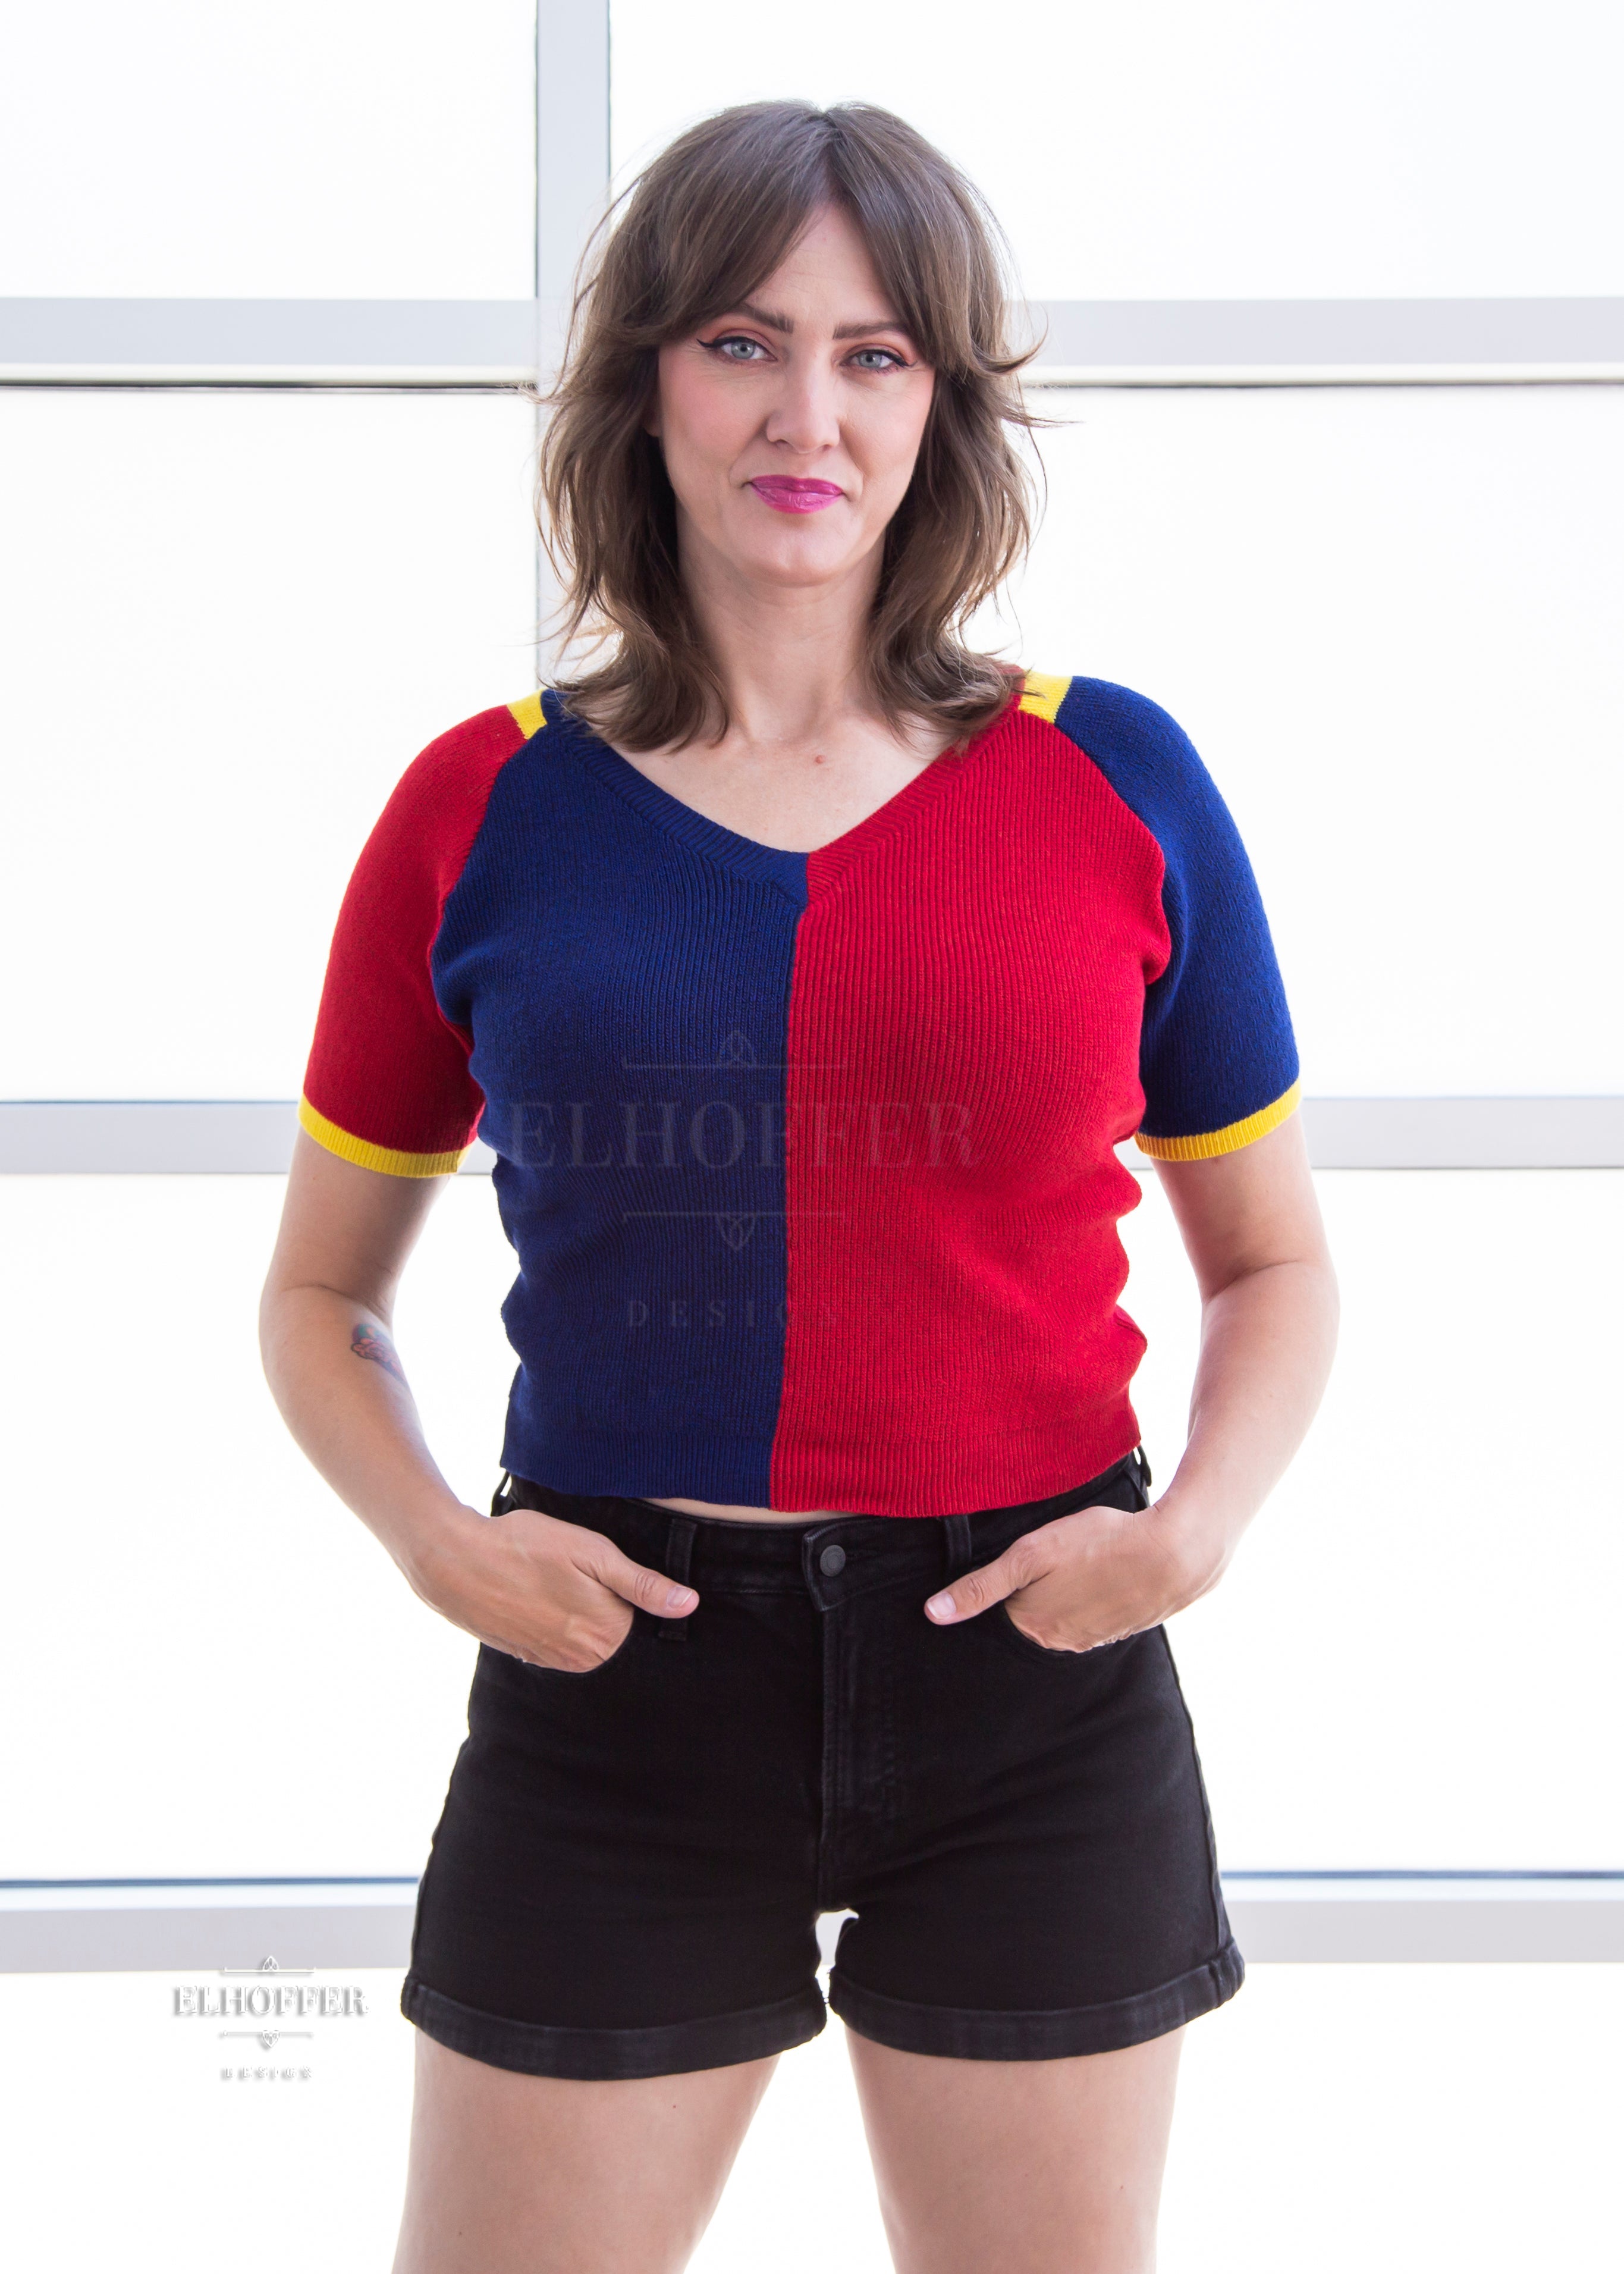 Ashley, a light olive skinned M model with shoulder length brown feathered hair, is wearing a short sleeve knit top with alternating blue and red colors. There is yellow detailing along the top of the shoulder and around the cuff of the sleeve.